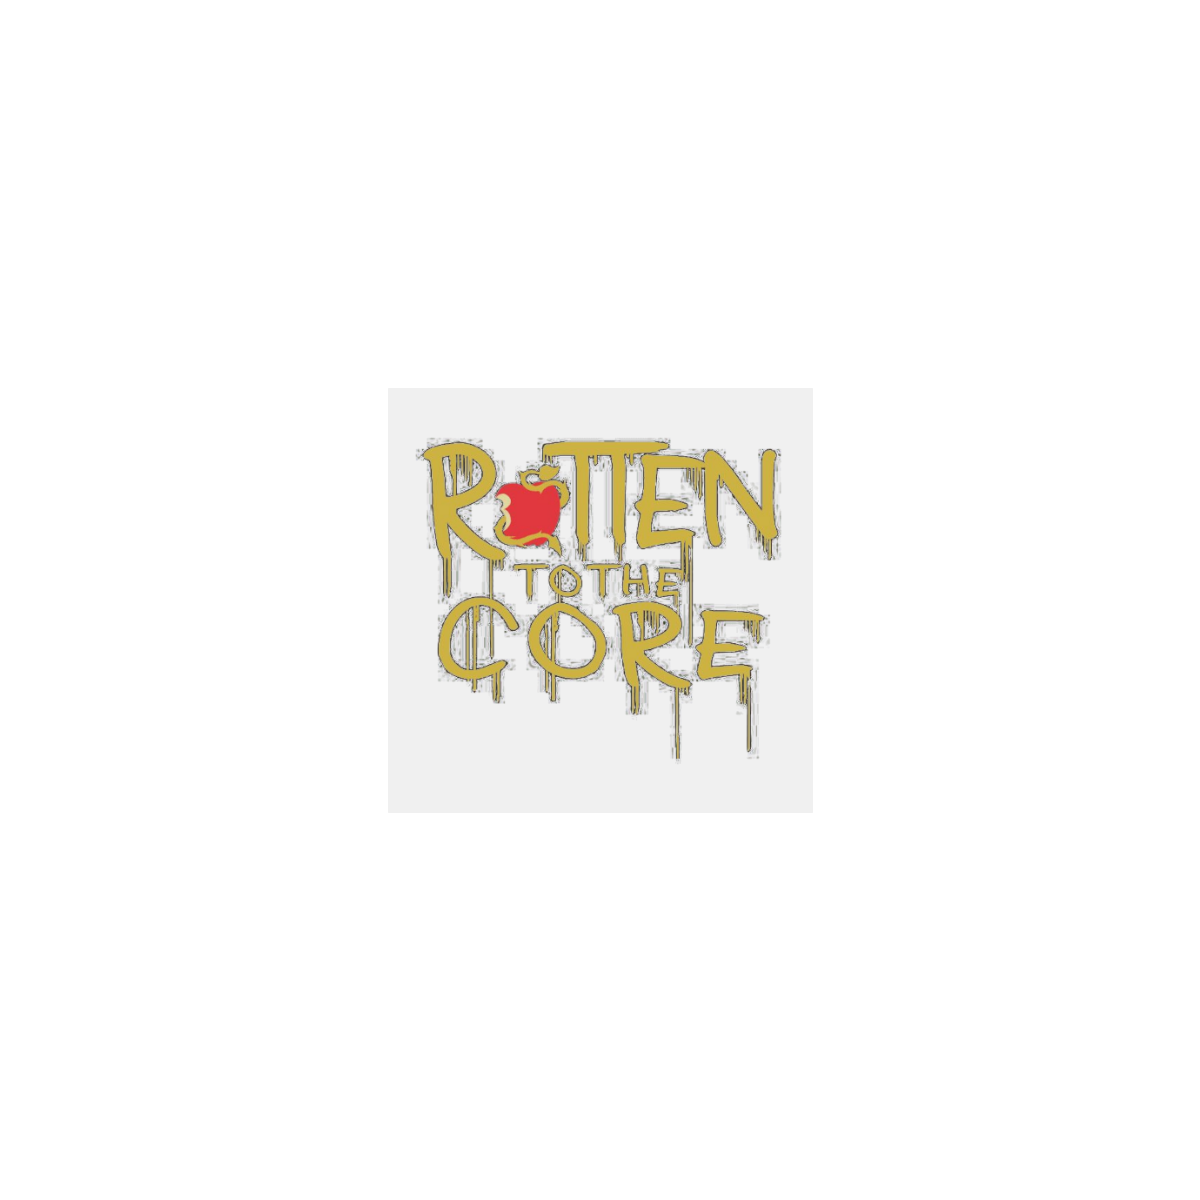 Rotten to the core Personalized Temporary Tattoo (15 Pieces)